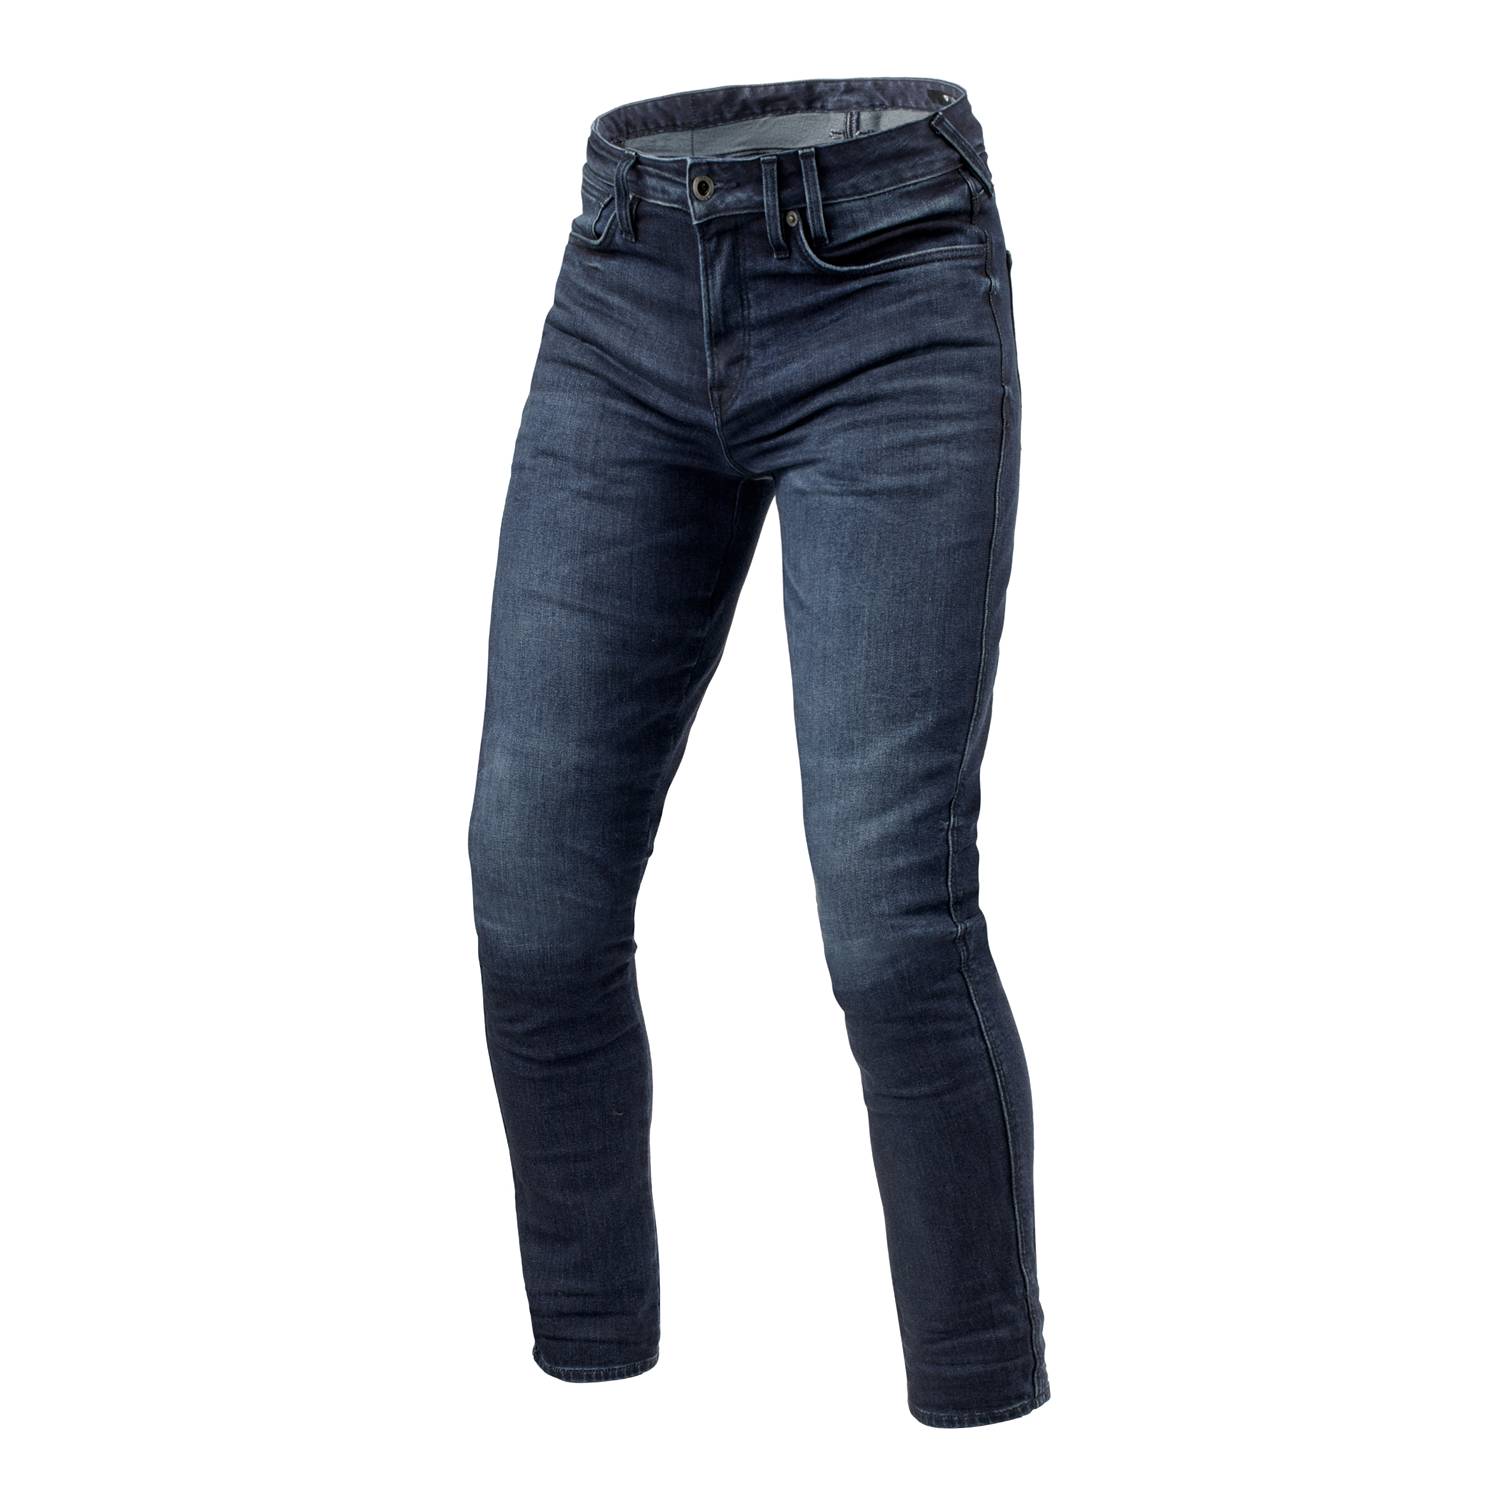 Image of EU REV'IT! Jeans Carlin SK Dark Blue Used L34 Motorcycle Jeans Taille L34/W28